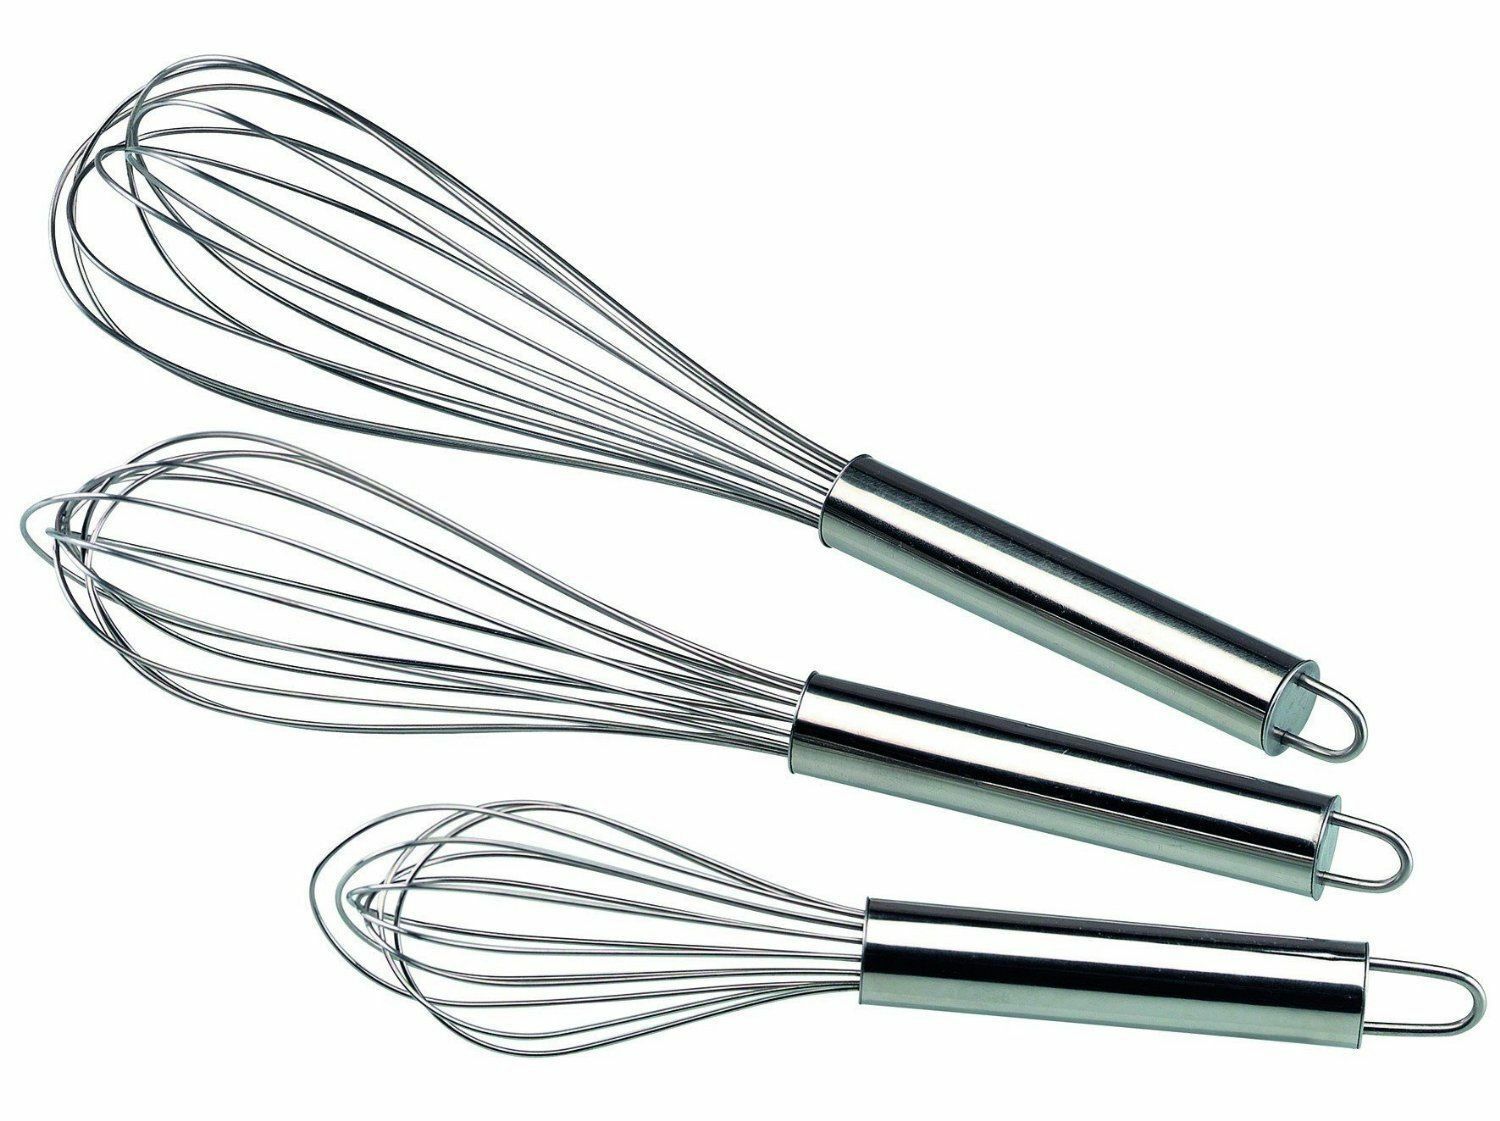 Balloon Whisk 14-inch Stainless